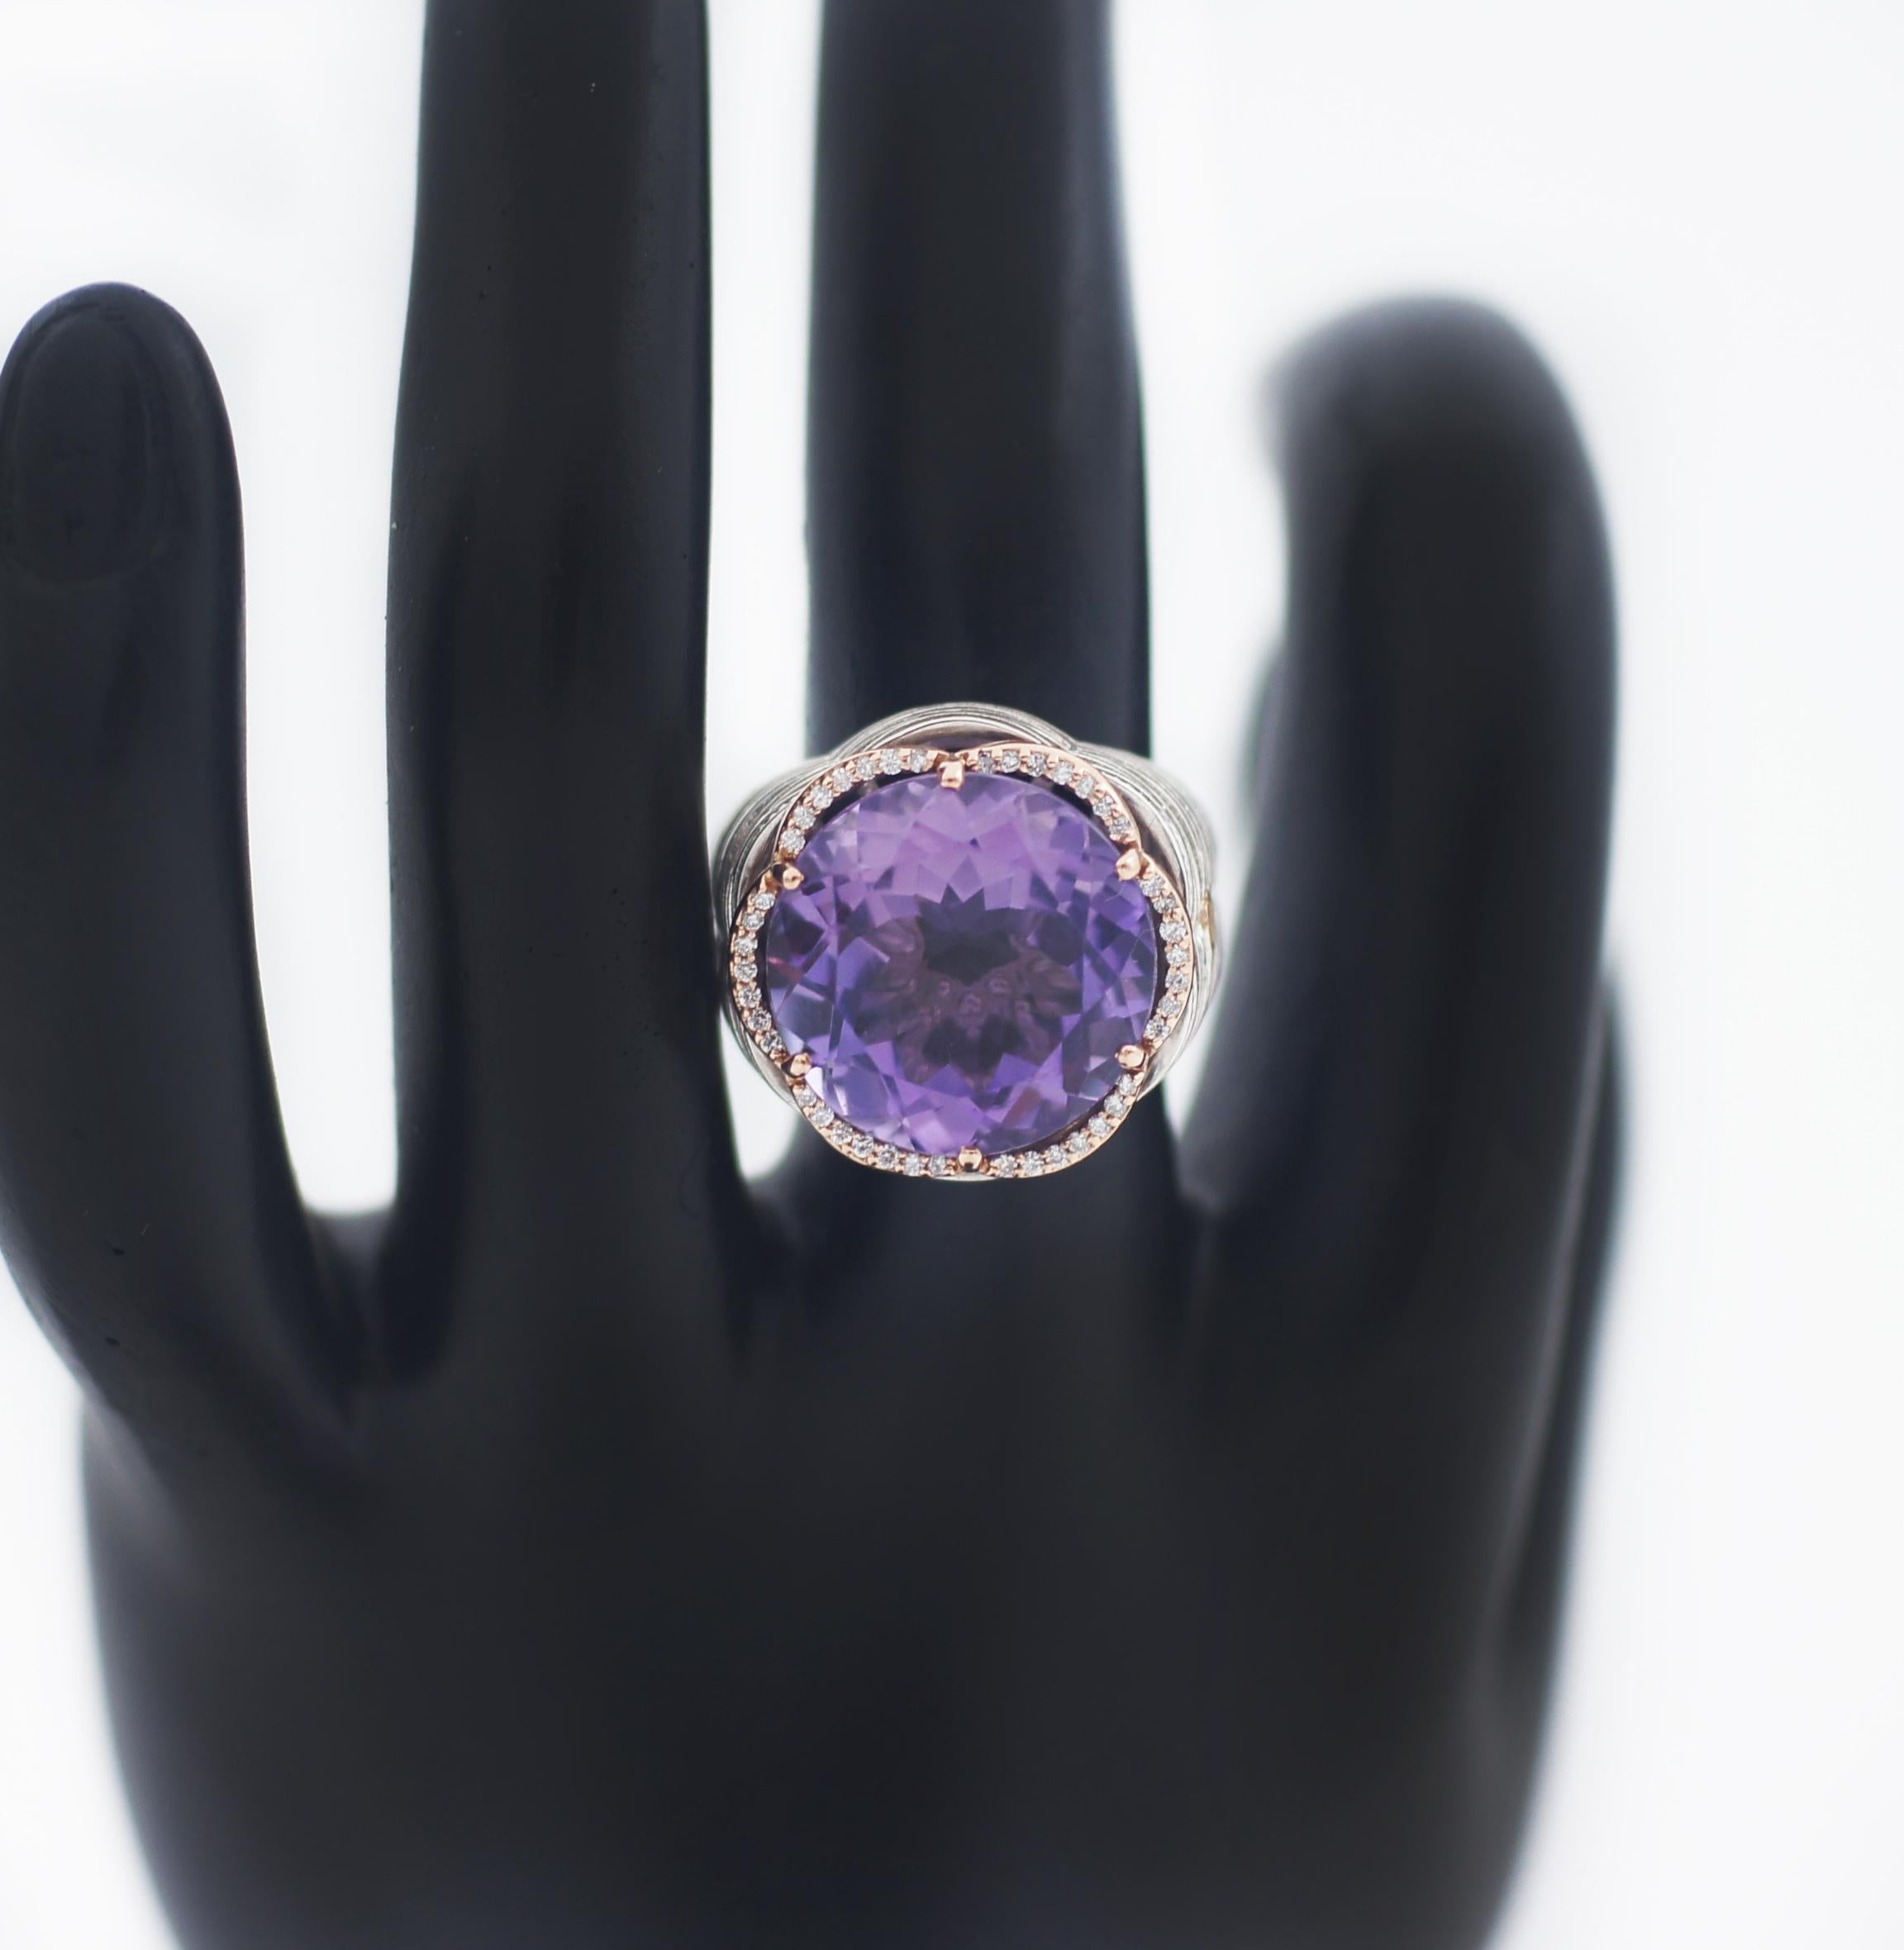 TACORI 18K 925 Silver Round Amethyst & Diamond Crescent Crown Ring
TACORI
Diamond Crescent Crown
Amethyst Large Gemstone
Sterling silver 925 and 18KT Rose gold
Approx. 10mm Diameter Round Amethyst 
Size 7
This beautiful pre-loved ring is in great